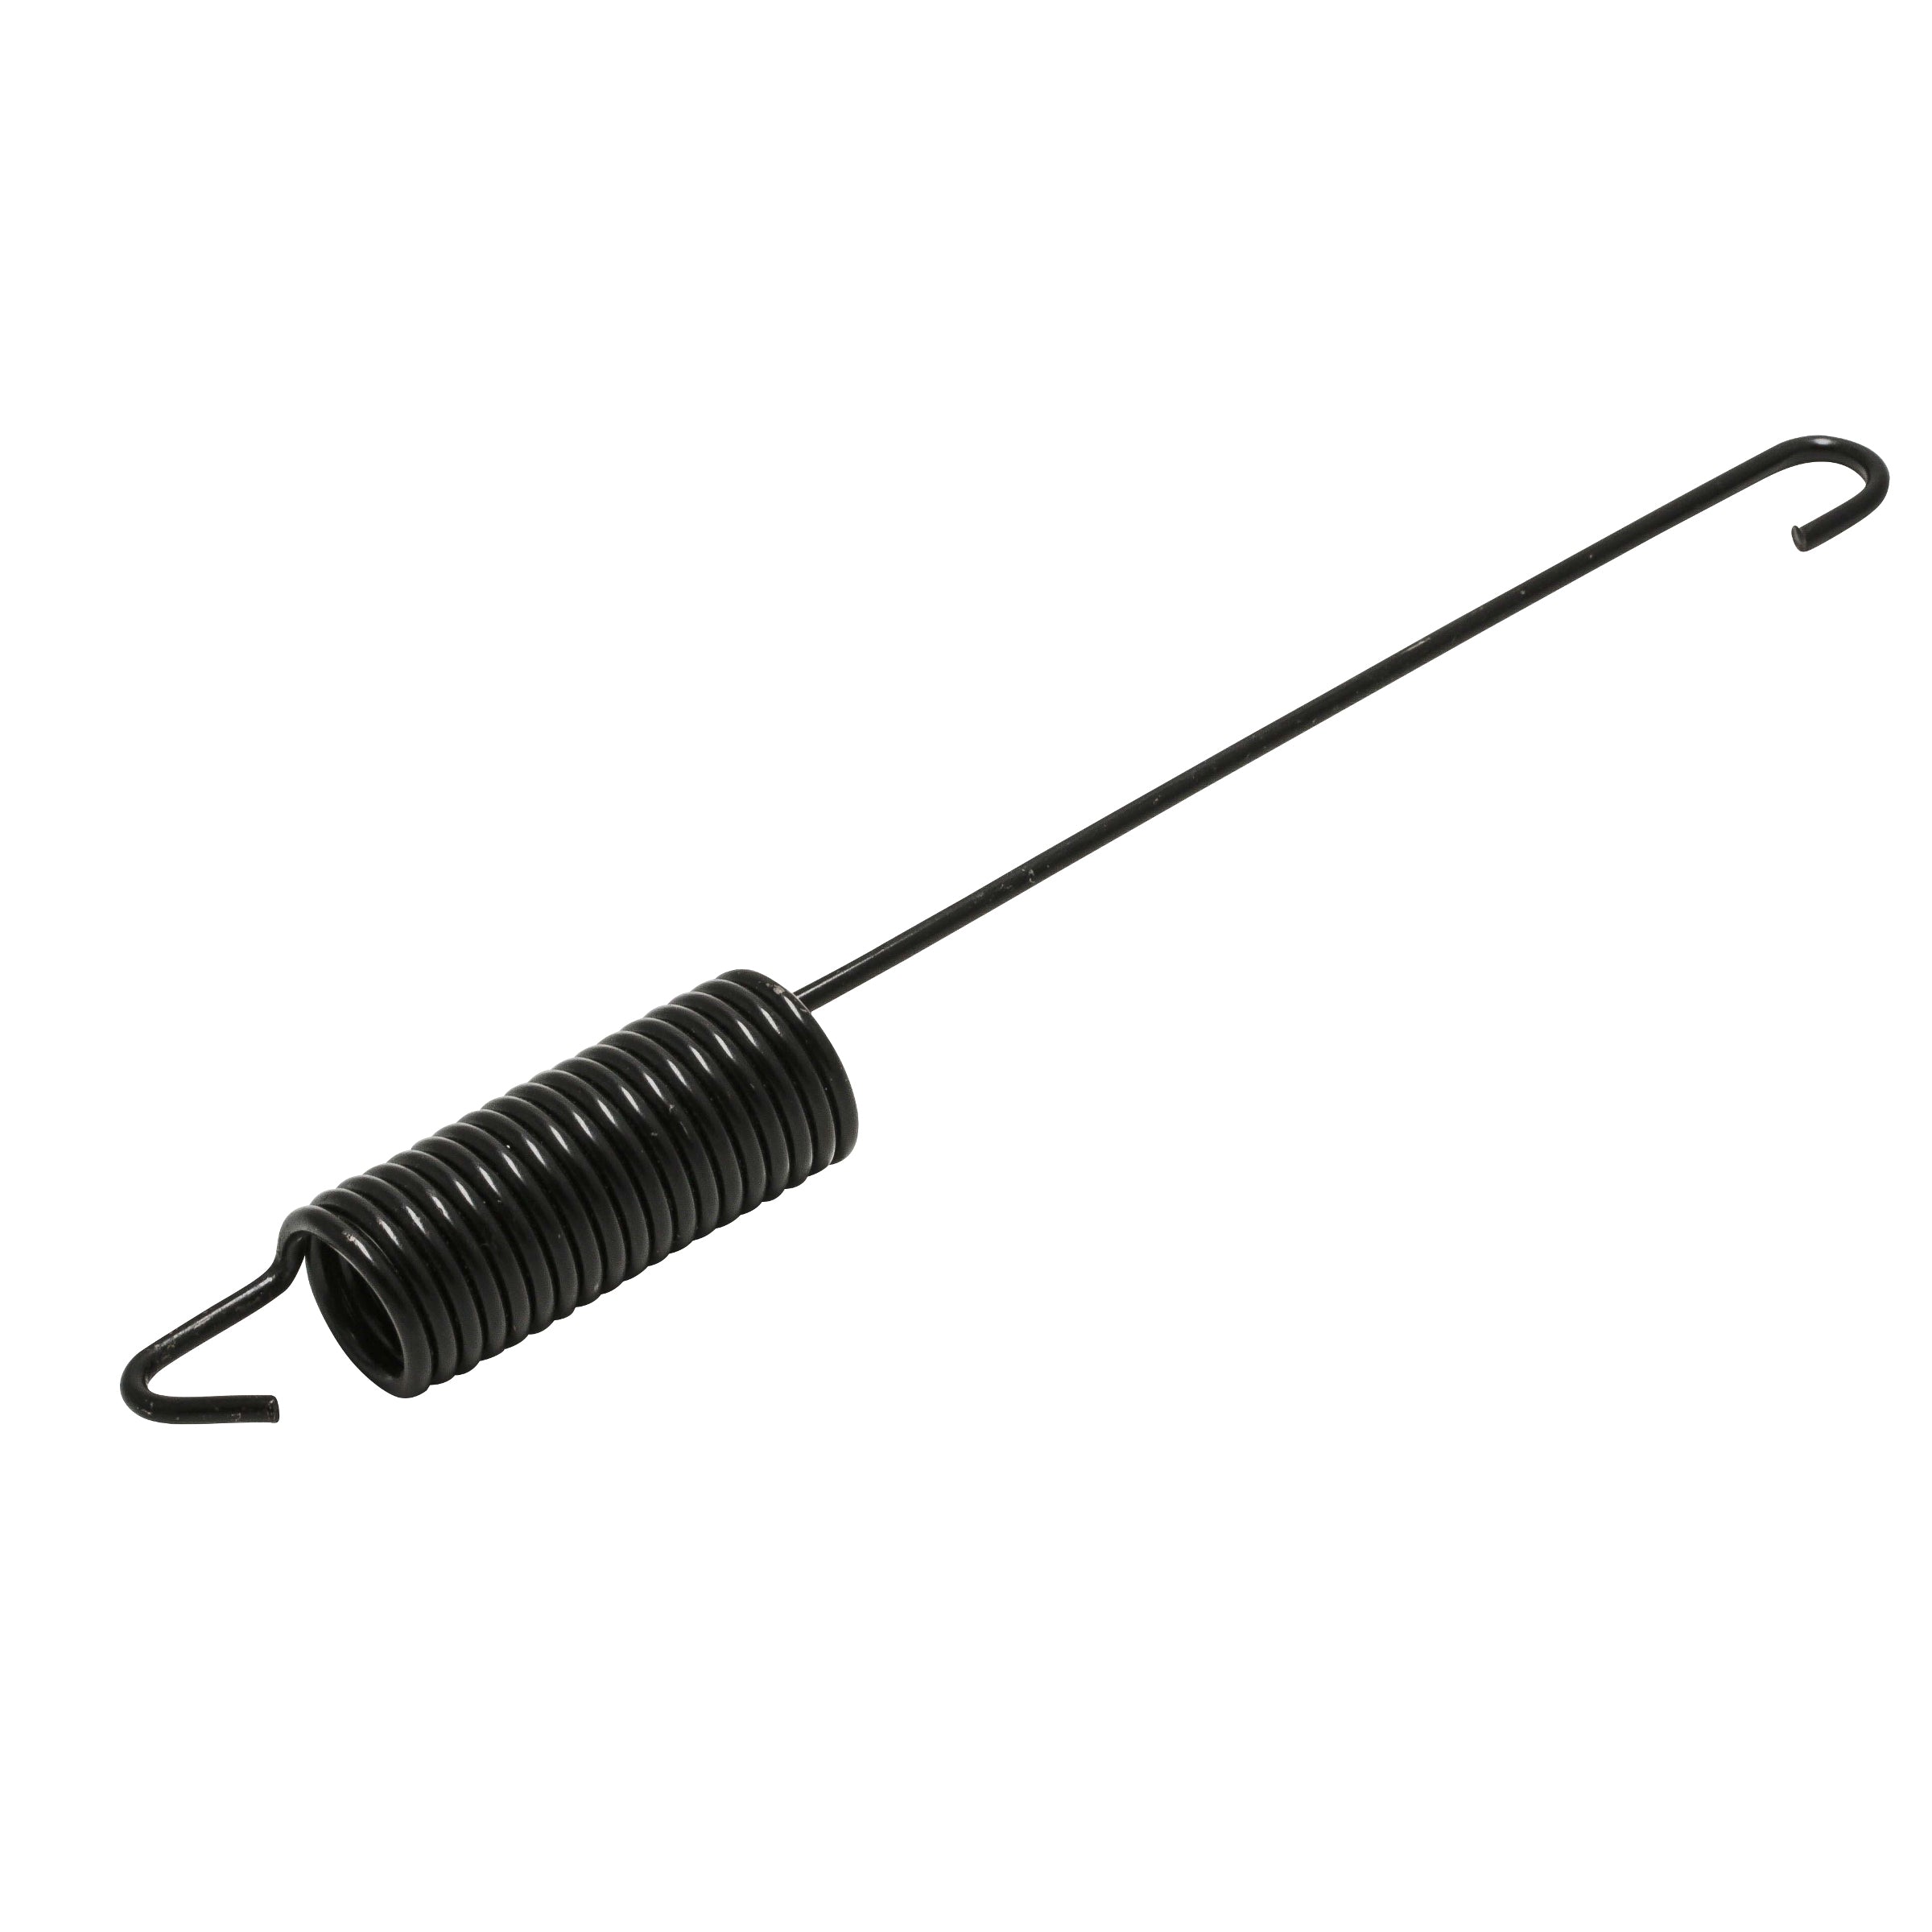 Brake & Clutch Pedal Retracting Spring • 1941-48 Ford Passenger